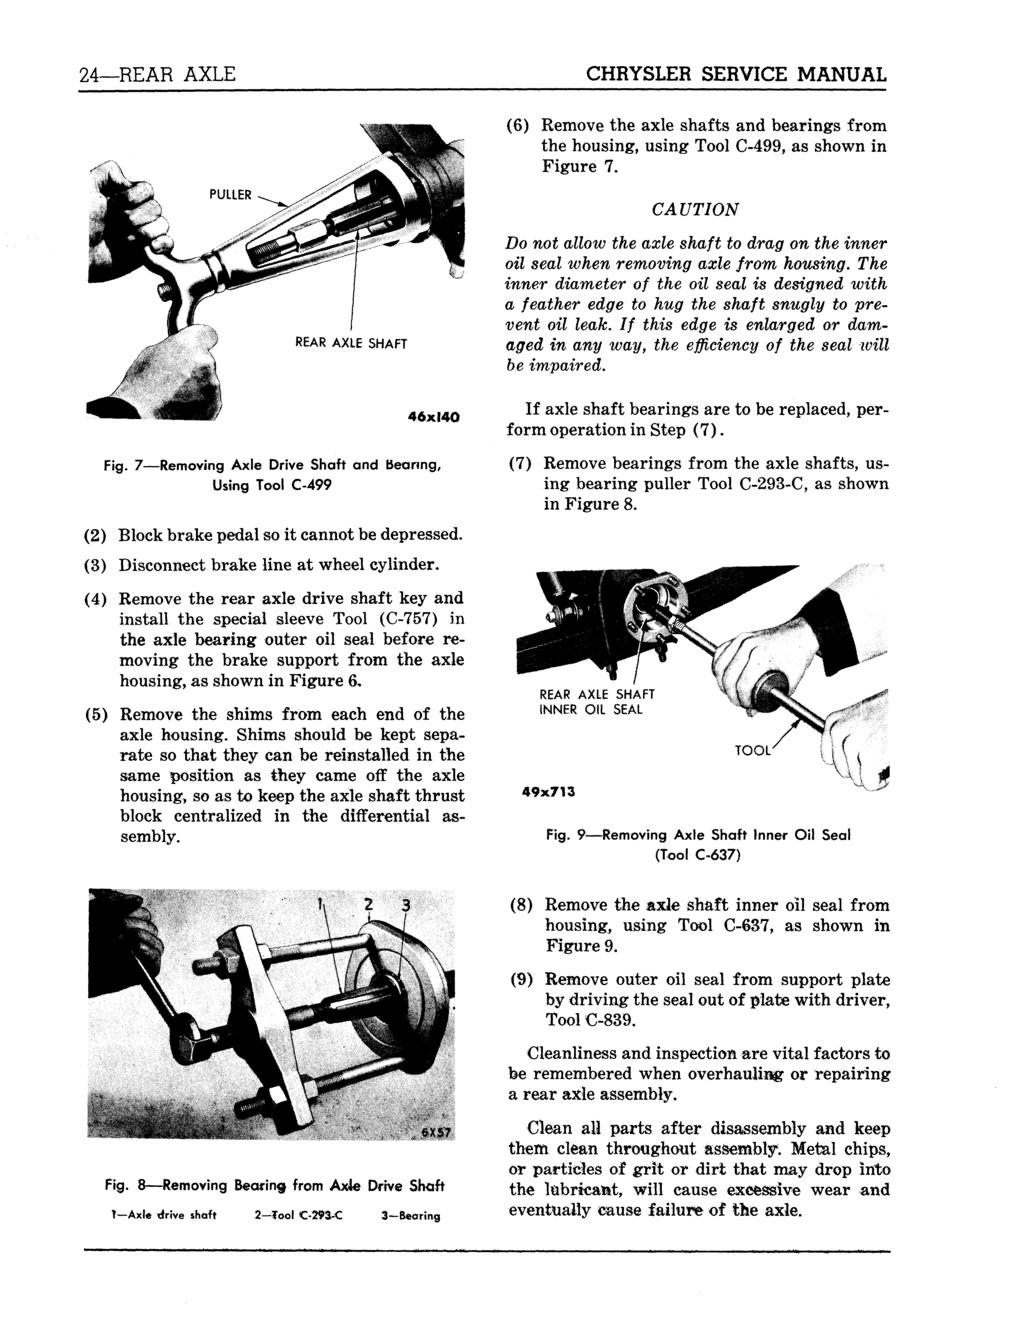 24 REAR AXLE CHRYSLER SERVICE MANUAL (6) Remove the axle shafts and bearings from the housing, using Tool C-499, as shown in Figure 7.